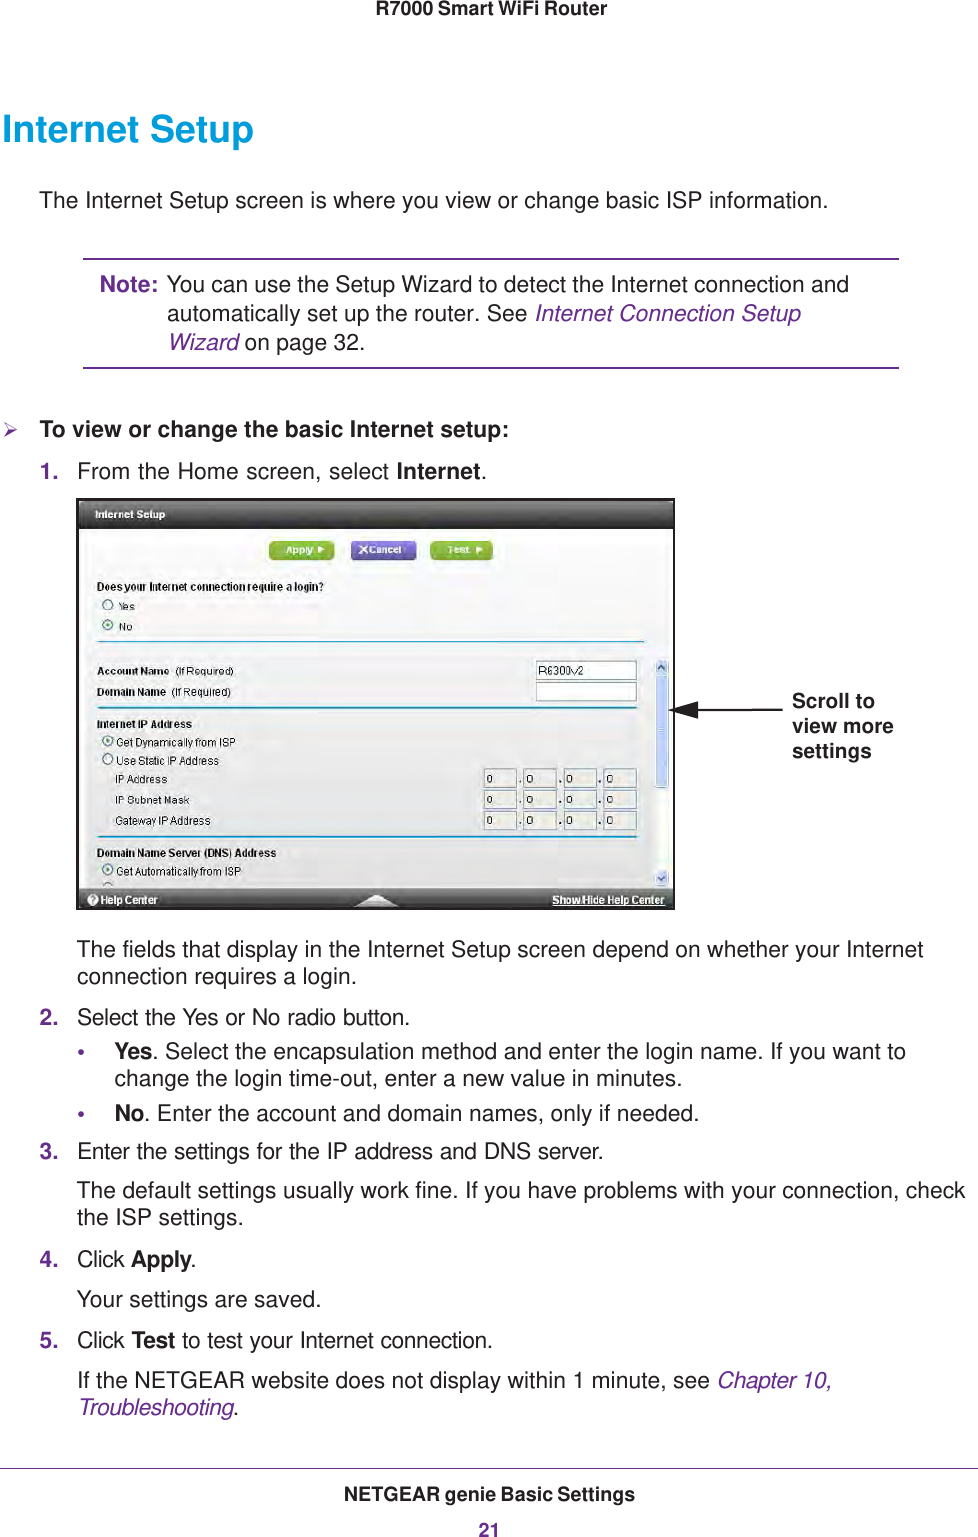 NETGEAR genie Basic Settings21 R7000 Smart WiFi RouterInternet SetupThe Internet Setup screen is where you view or change basic ISP information.Note: You can use the Setup Wizard to detect the Internet connection and automatically set up the router. See Internet Connection Setup Wizard on page  32.To view or change the basic Internet setup:1. From the Home screen, select Internet.Scroll to view more settingsThe fields that display in the Internet Setup screen depend on whether your Internet connection requires a login.2. Select the Yes or No radio button.•Yes. Select the encapsulation method and enter the login name. If you want to change the login time-out, enter a new value in minutes.•No. Enter the account and domain names, only if needed.3. Enter the settings for the IP address and DNS server. The default settings usually work fine. If you have problems with your connection, check the ISP settings.4. Click Apply.Your settings are saved.5. Click Test to test your Internet connection. If the NETGEAR website does not display within 1 minute, see Chapter 10, Troubleshooting.